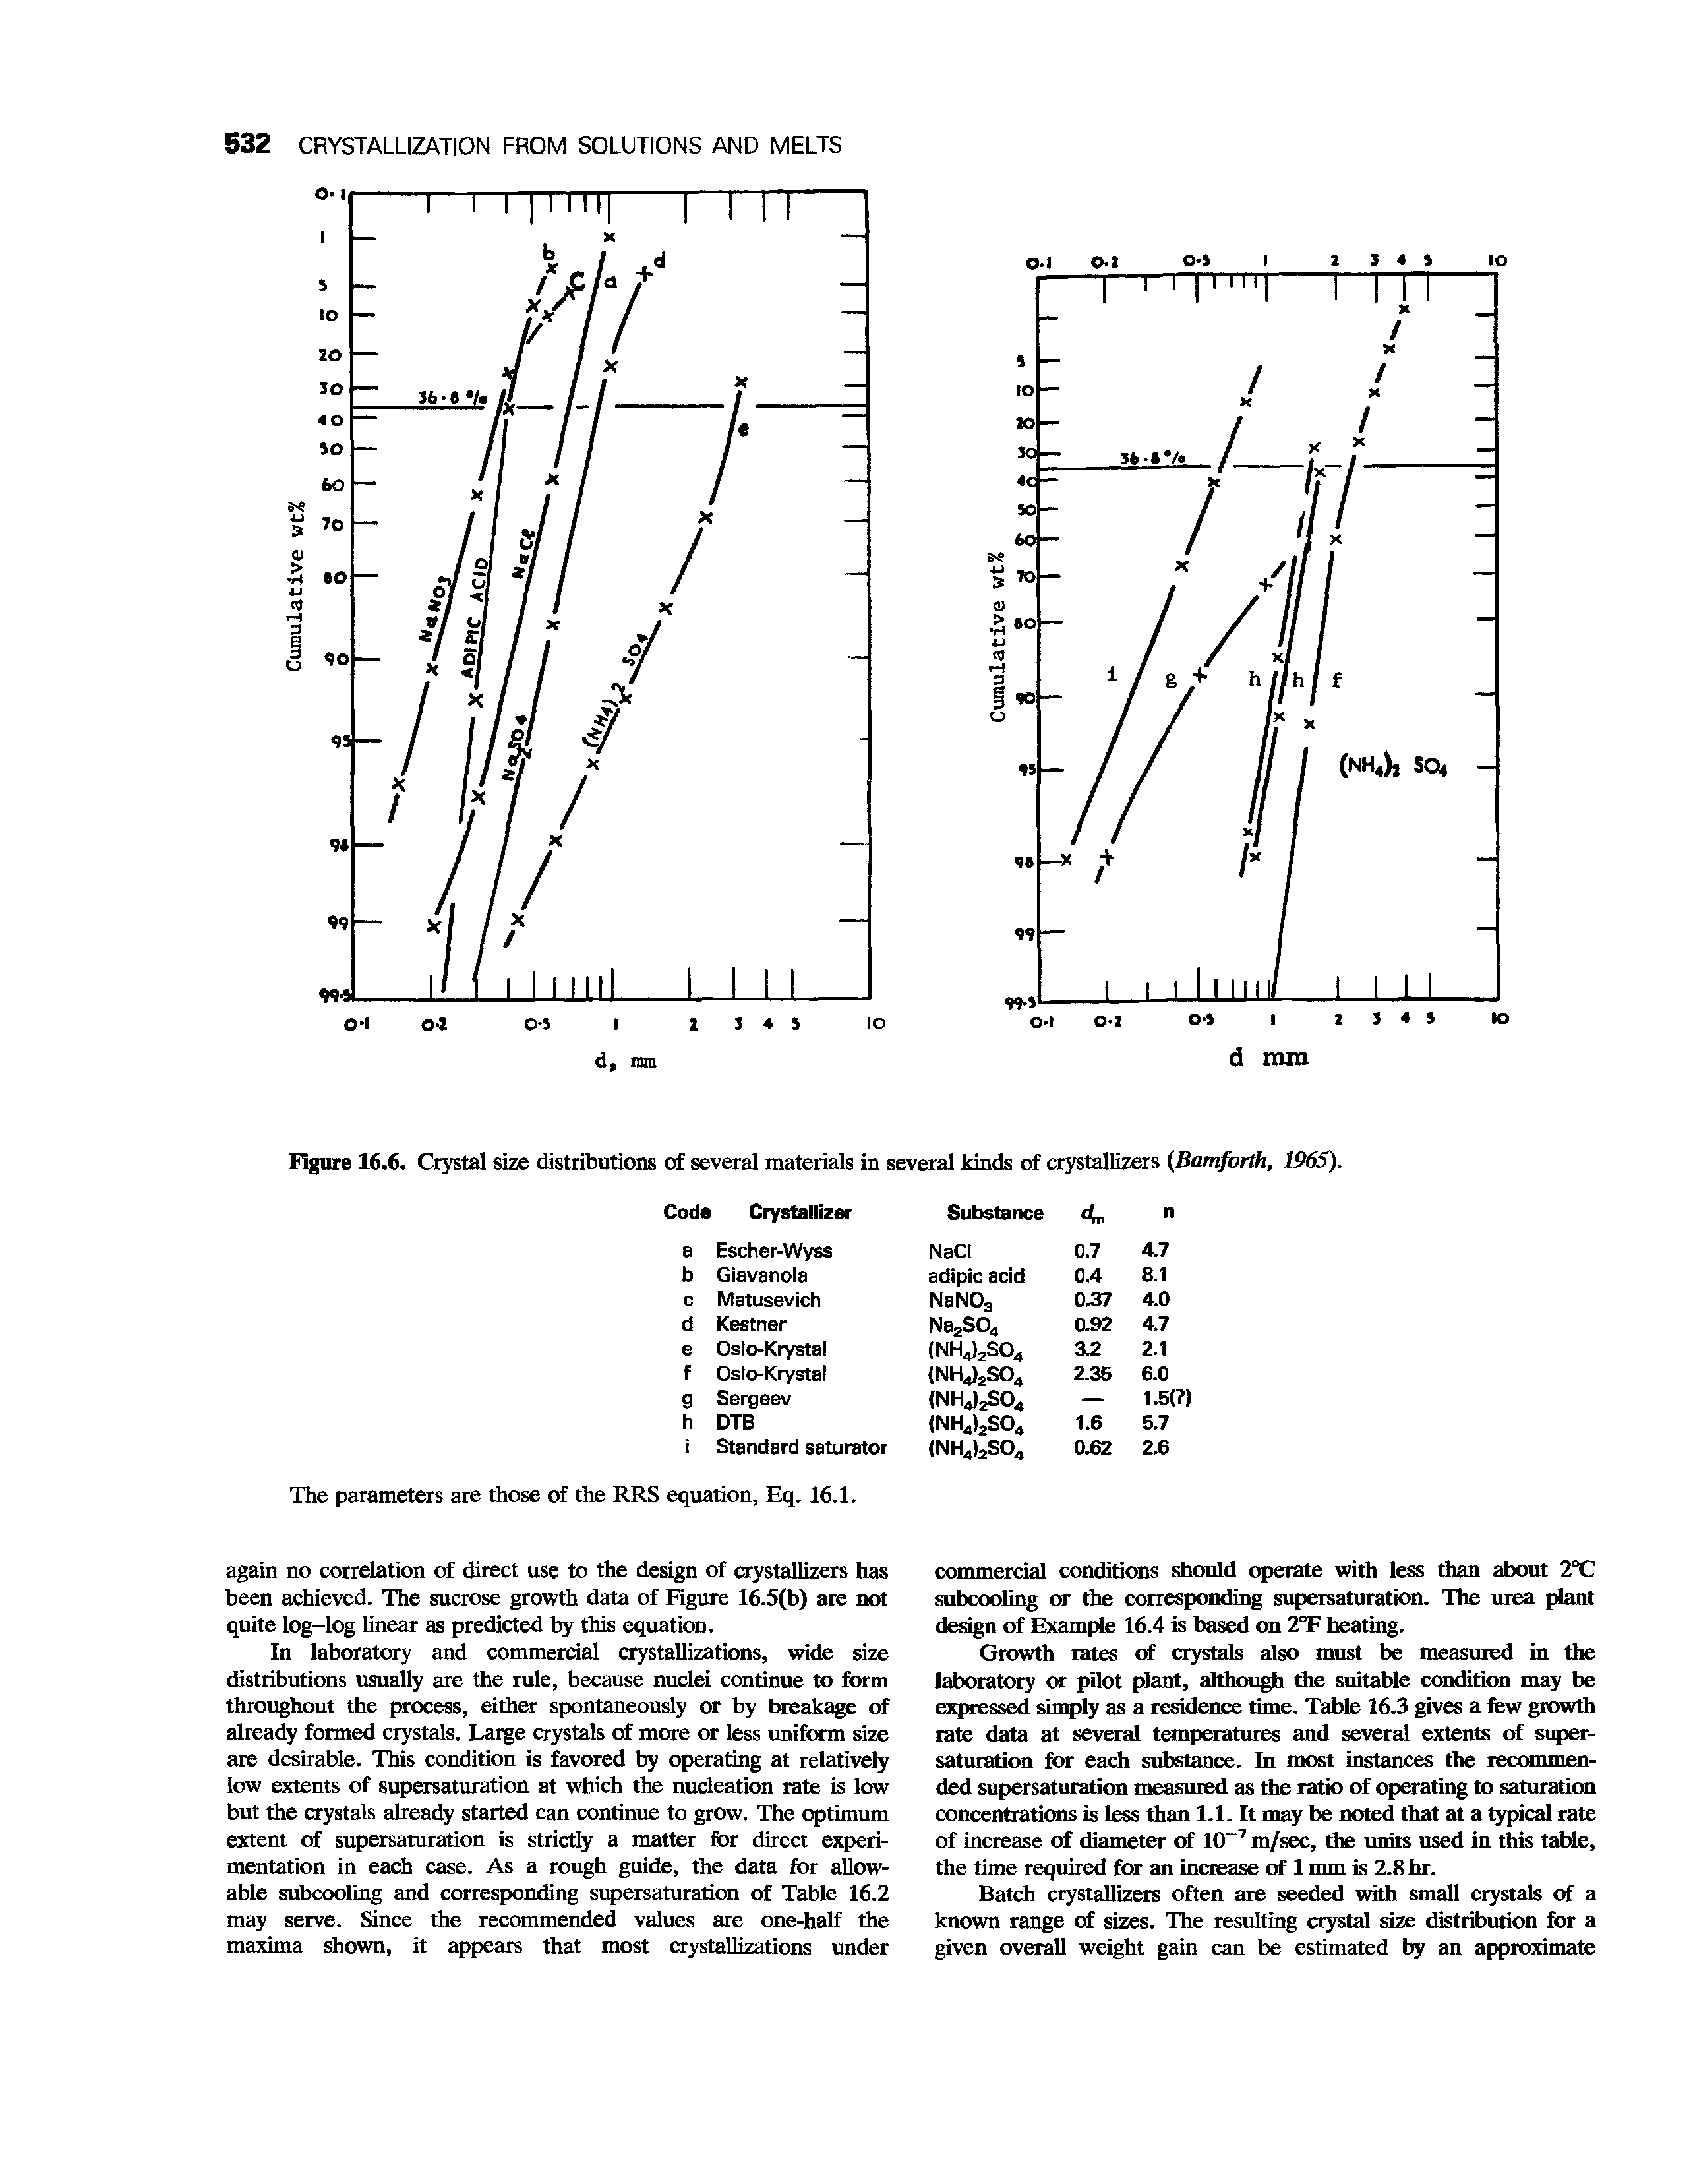 Figure 16.6. Crystal size distributions of several materials in several kinds of crystallizers (Bamforth, 1965).